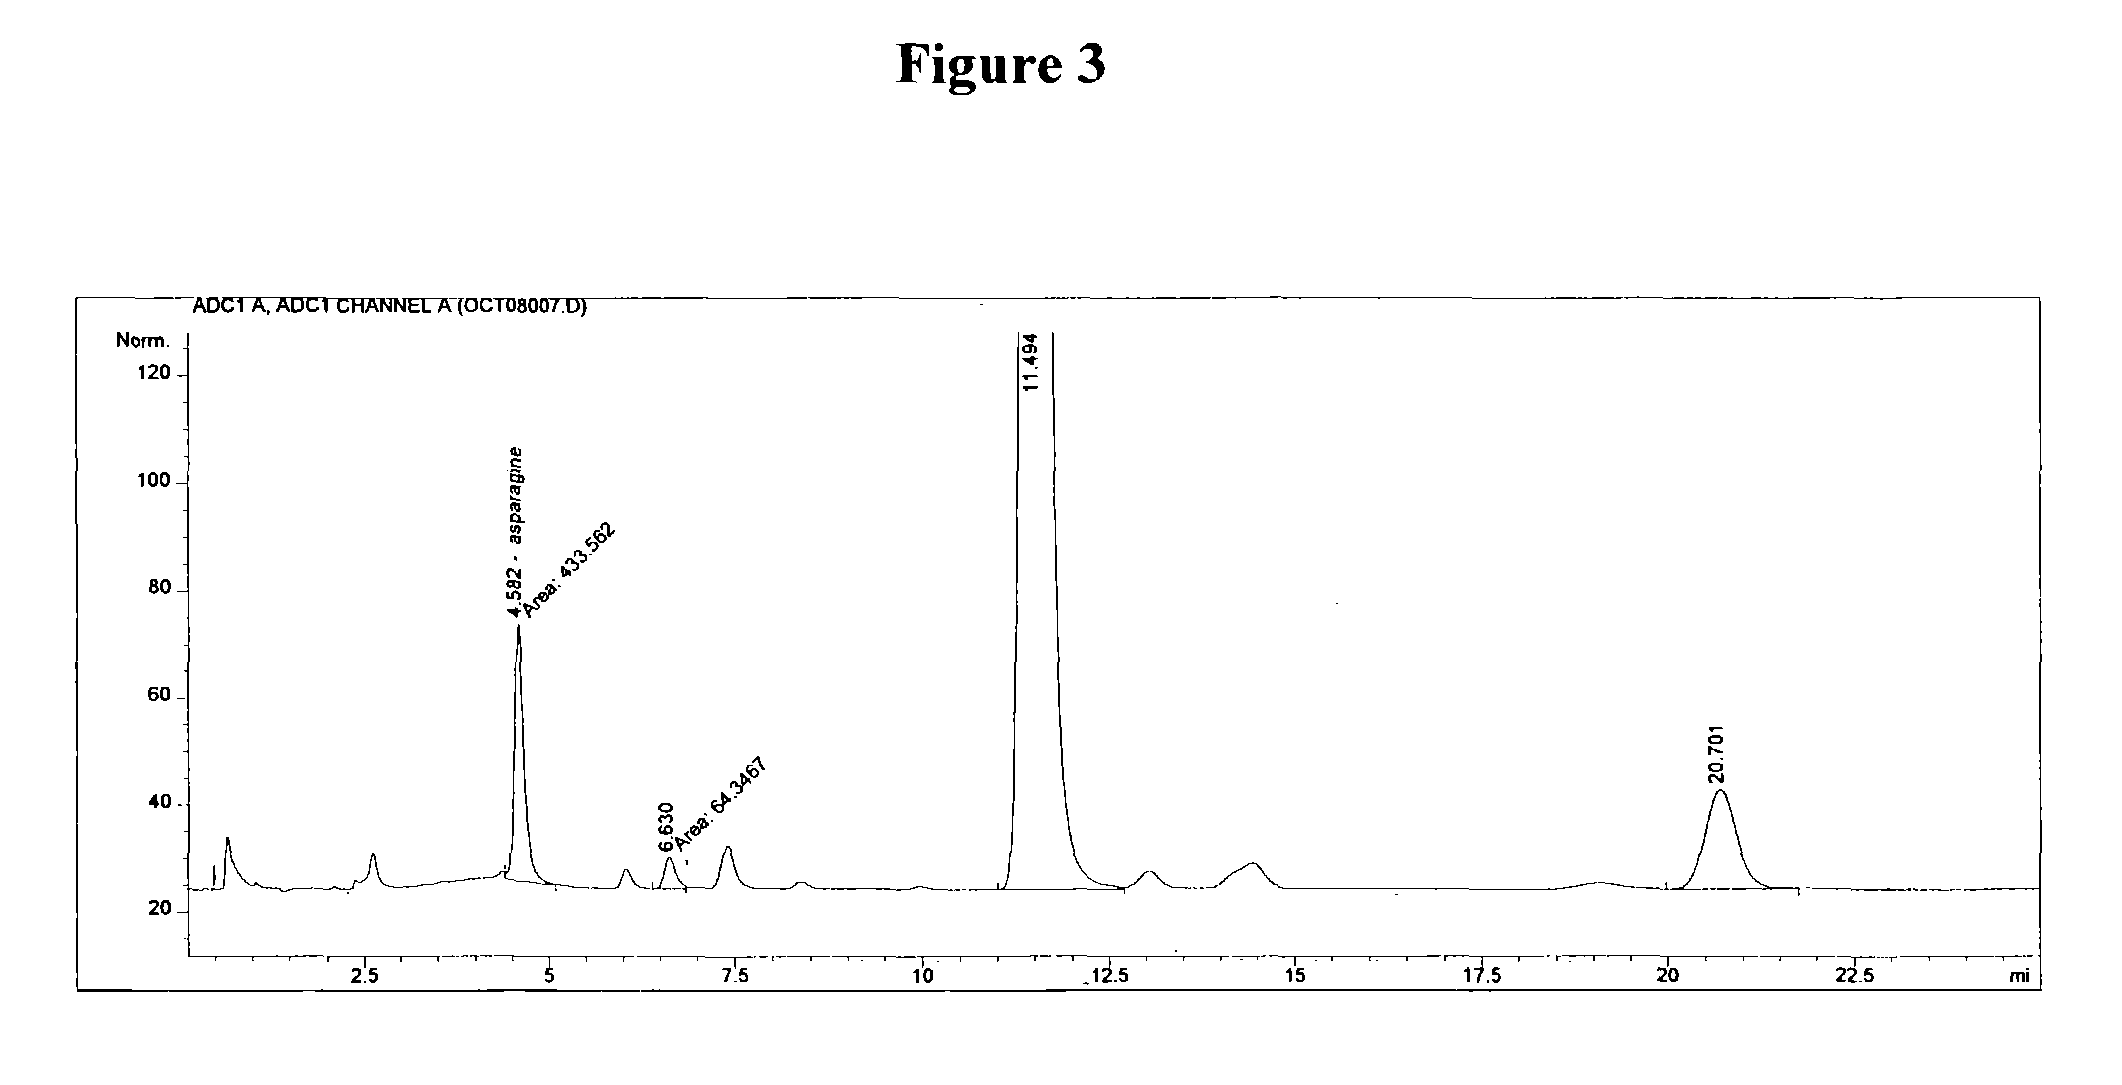 Method for reduction of acrylamide in cocoa products, cocoa products having reduced levels of acrylamide, and article of commerce